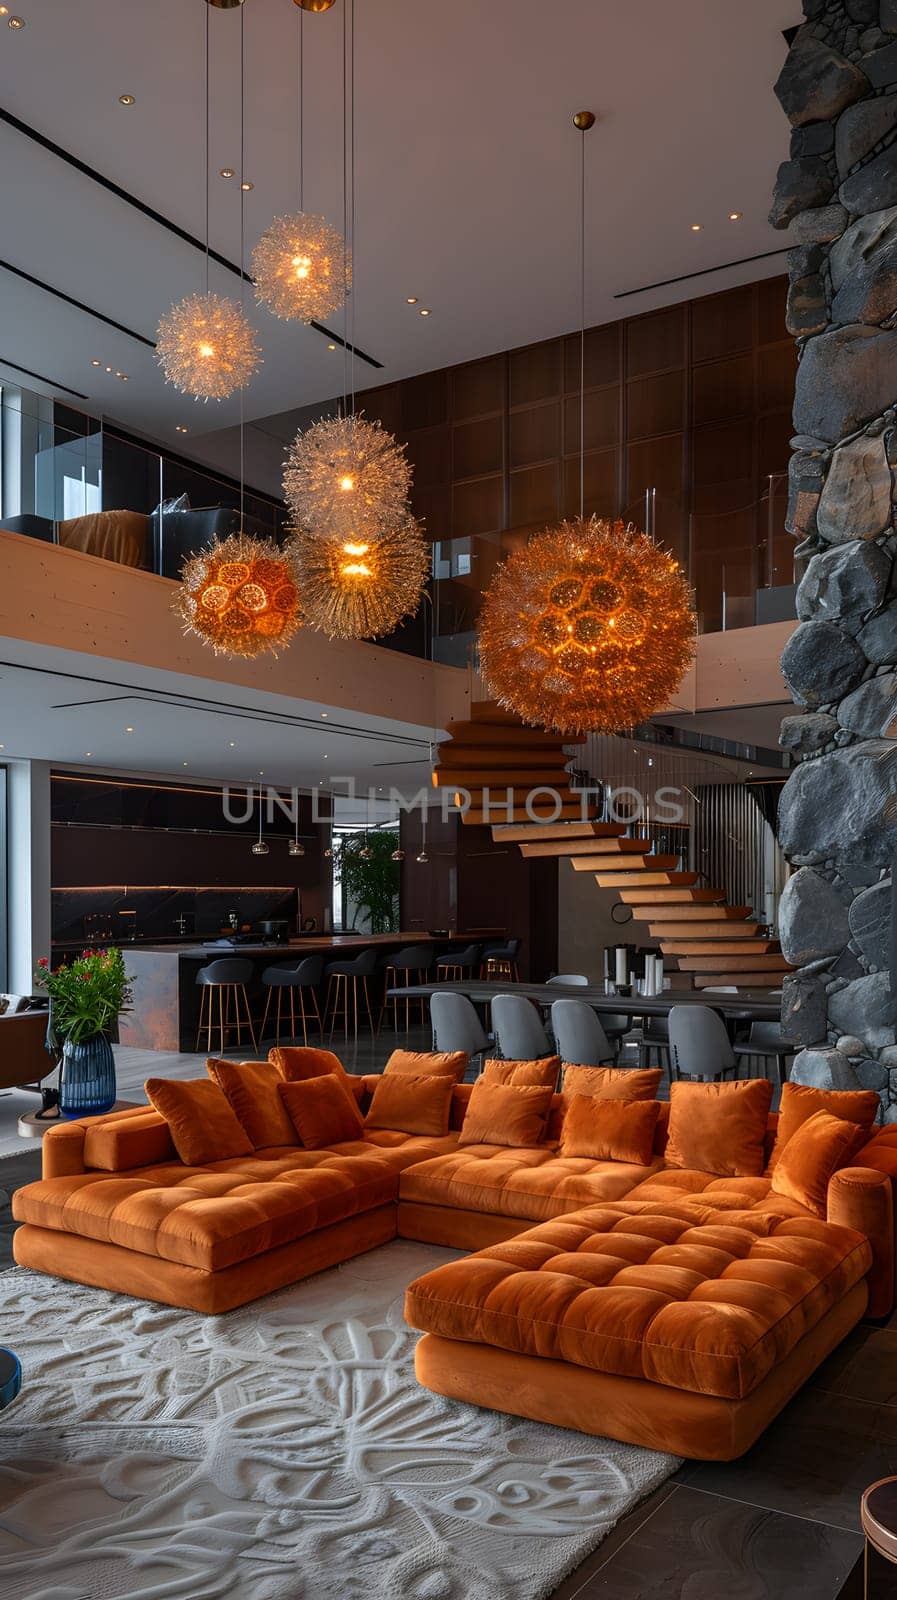 Modern interior design featuring a spacious living room with a large orange sectional couch, wooden stairs, and a studio couch. The room is illuminated by natural light and adorned with plants